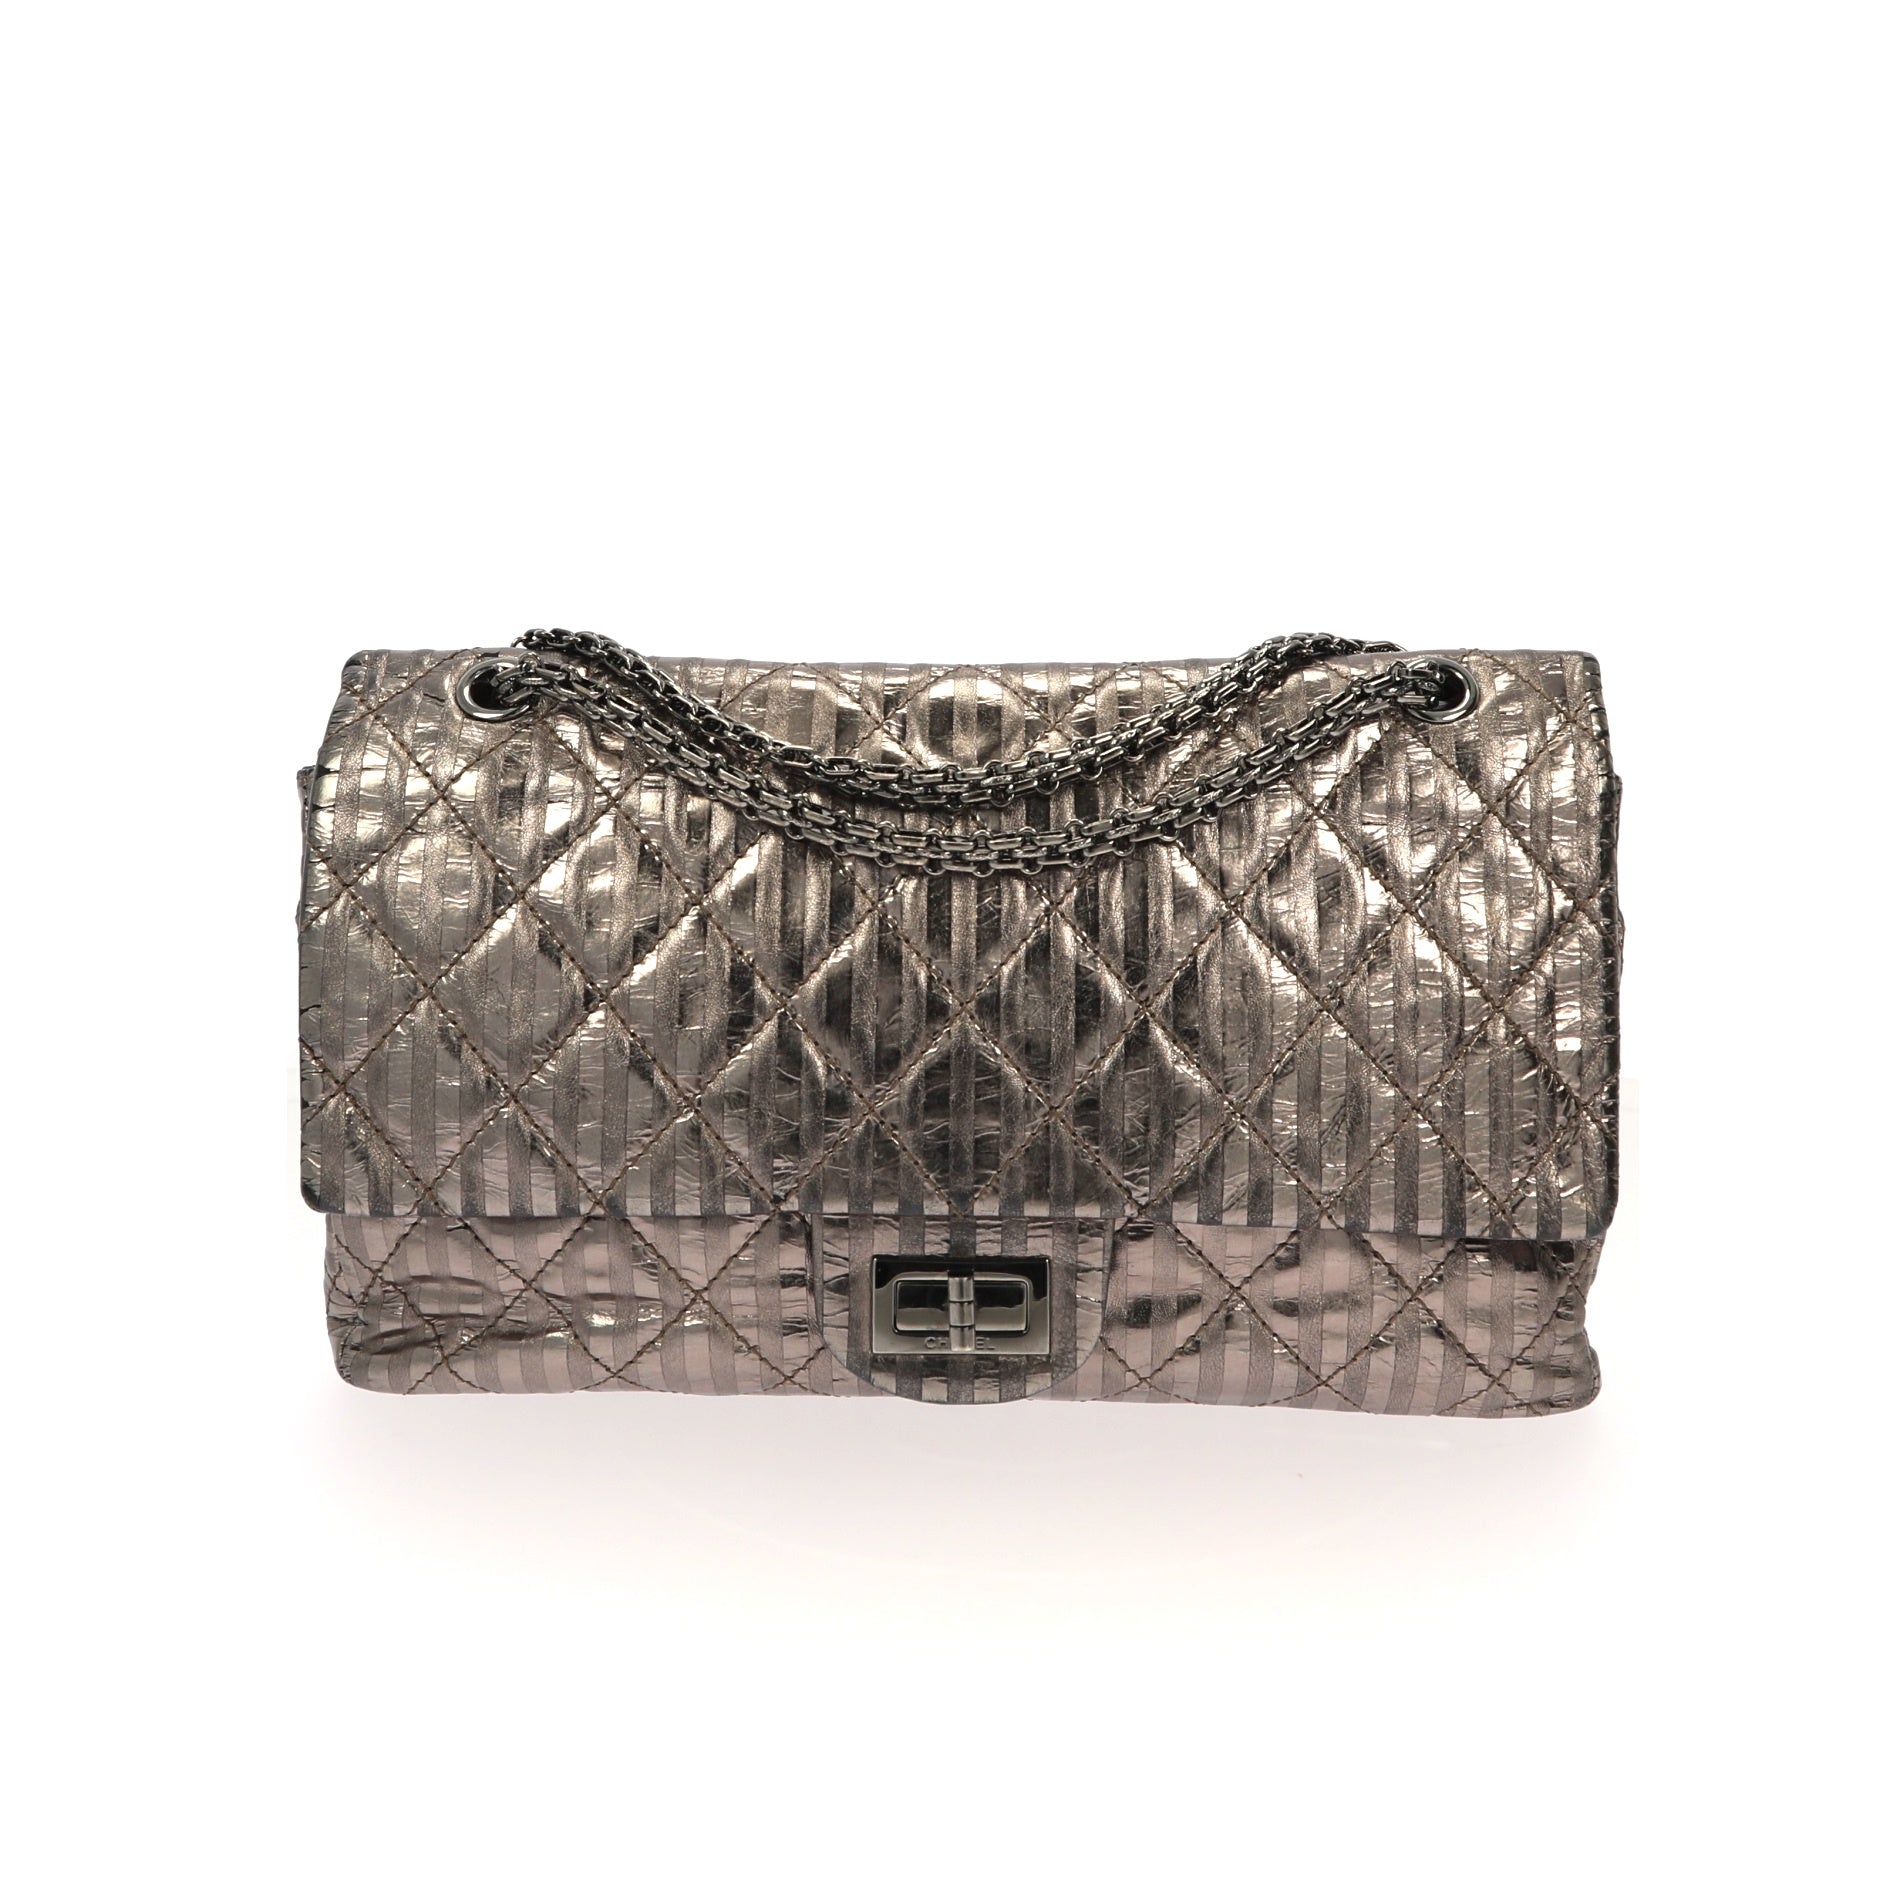 Chanel 2.55 Reissue 227 shoulder bag in White quilted leather, black silver  HW